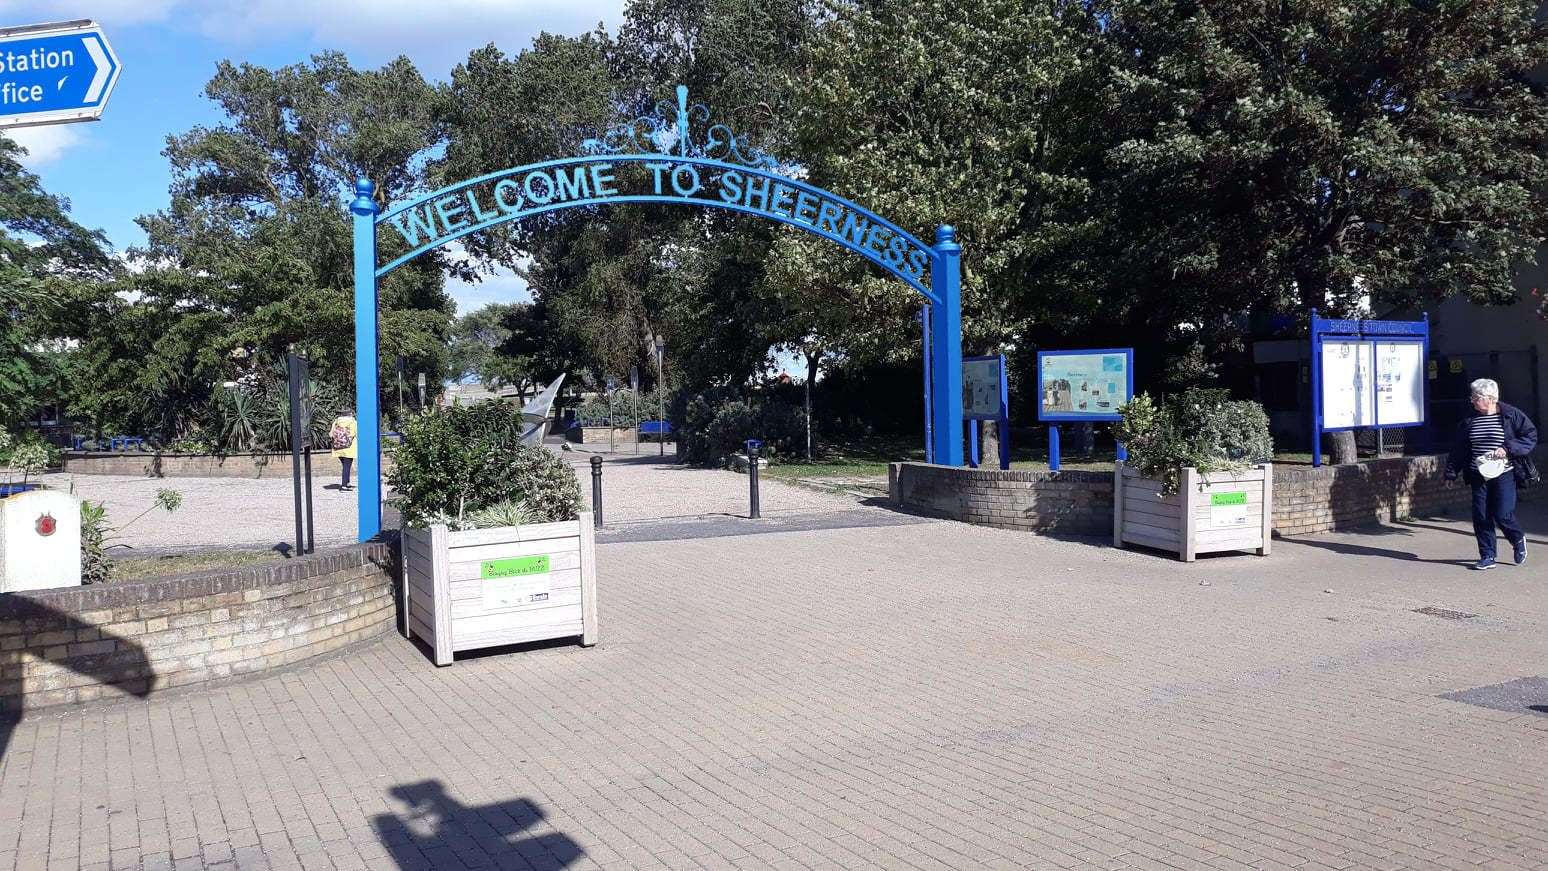 New Welcome to Sheerness design by Chris Fowlds at the entrance to Beachfields being built for Sheerness Town Council